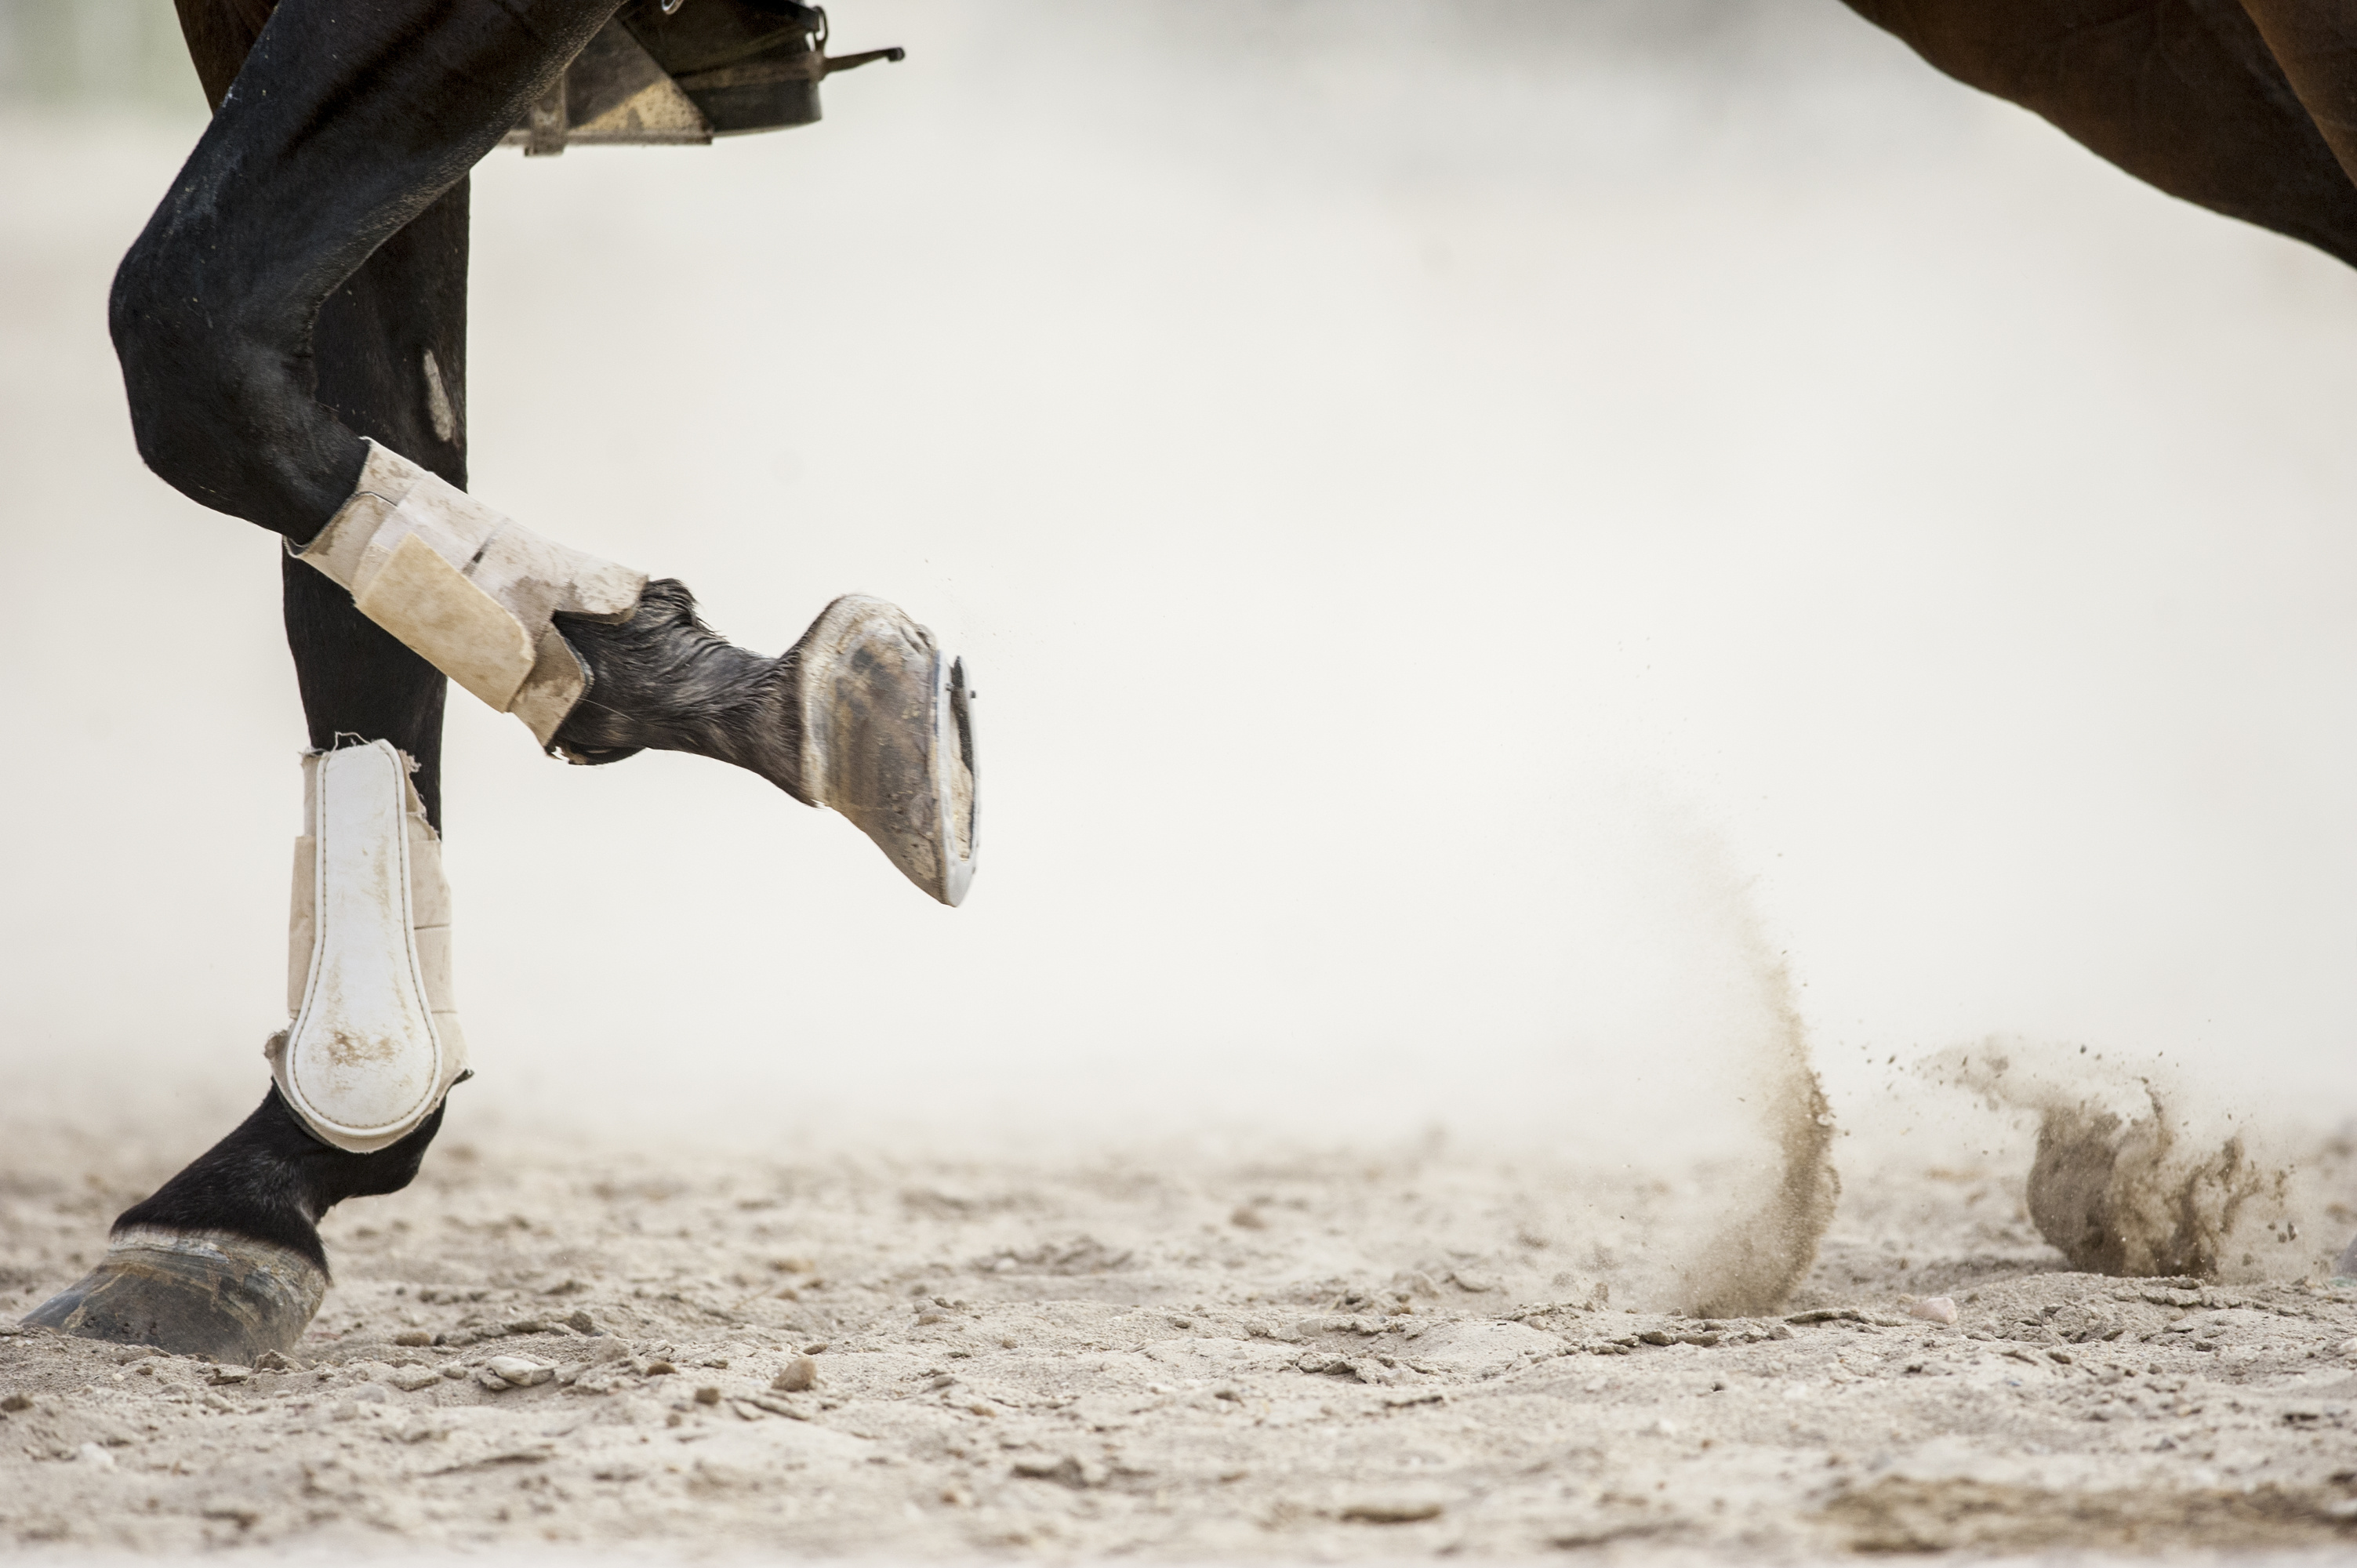 Close up of a horse's legs, kicking up dust from the ground.